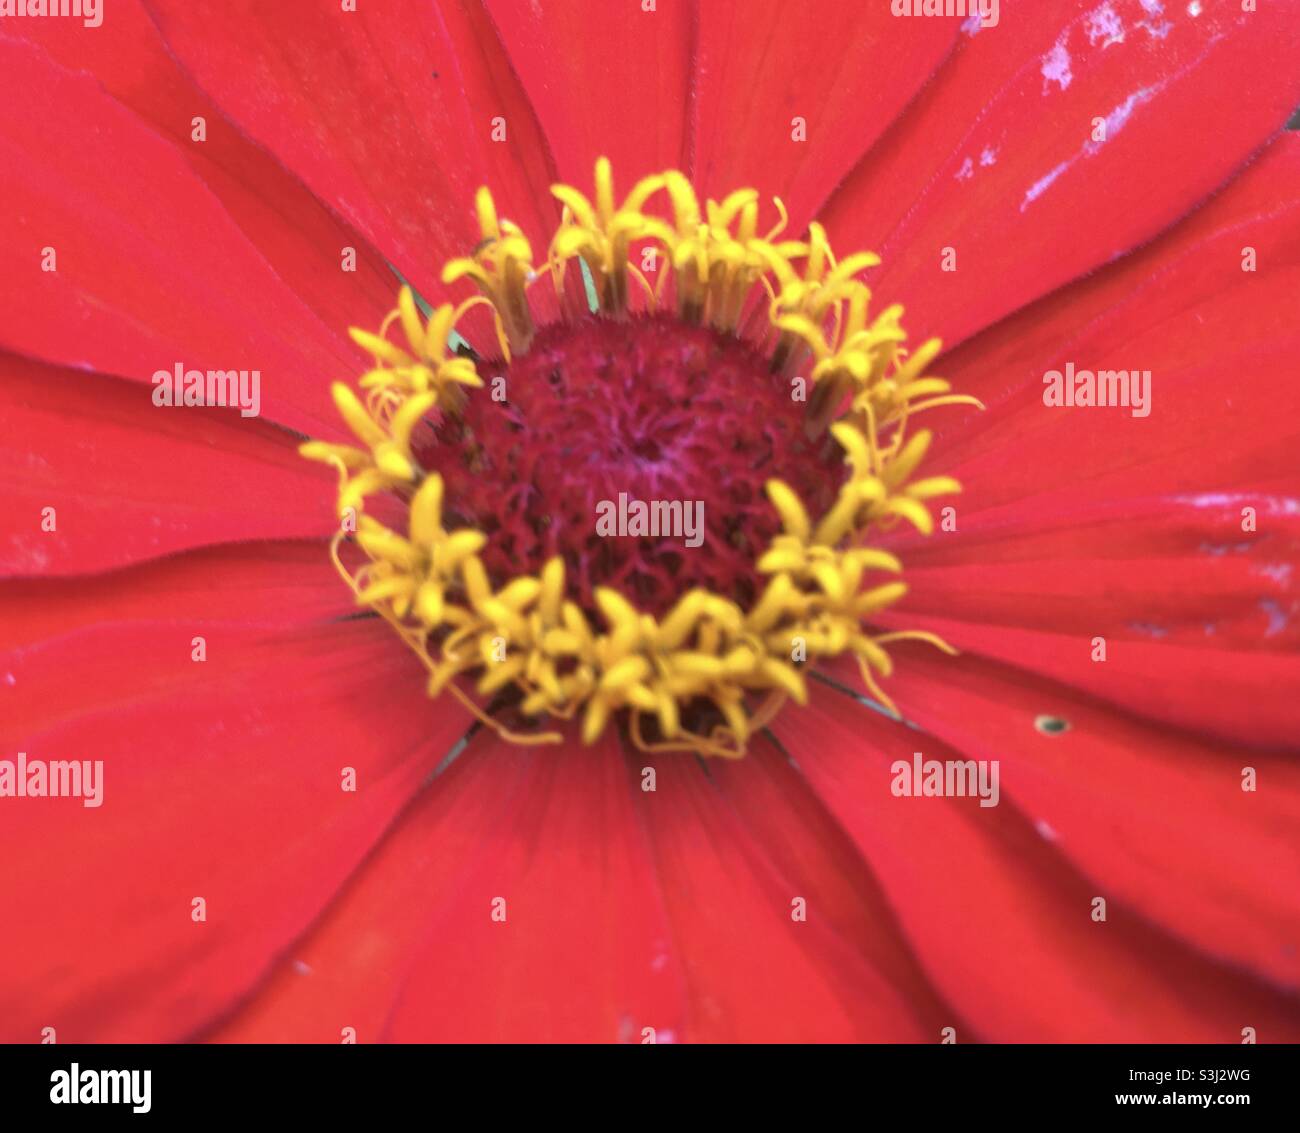 Red, yellow, flower, circle, centre, nature, beauty, passion, life, chi   Beauty Stock Photo